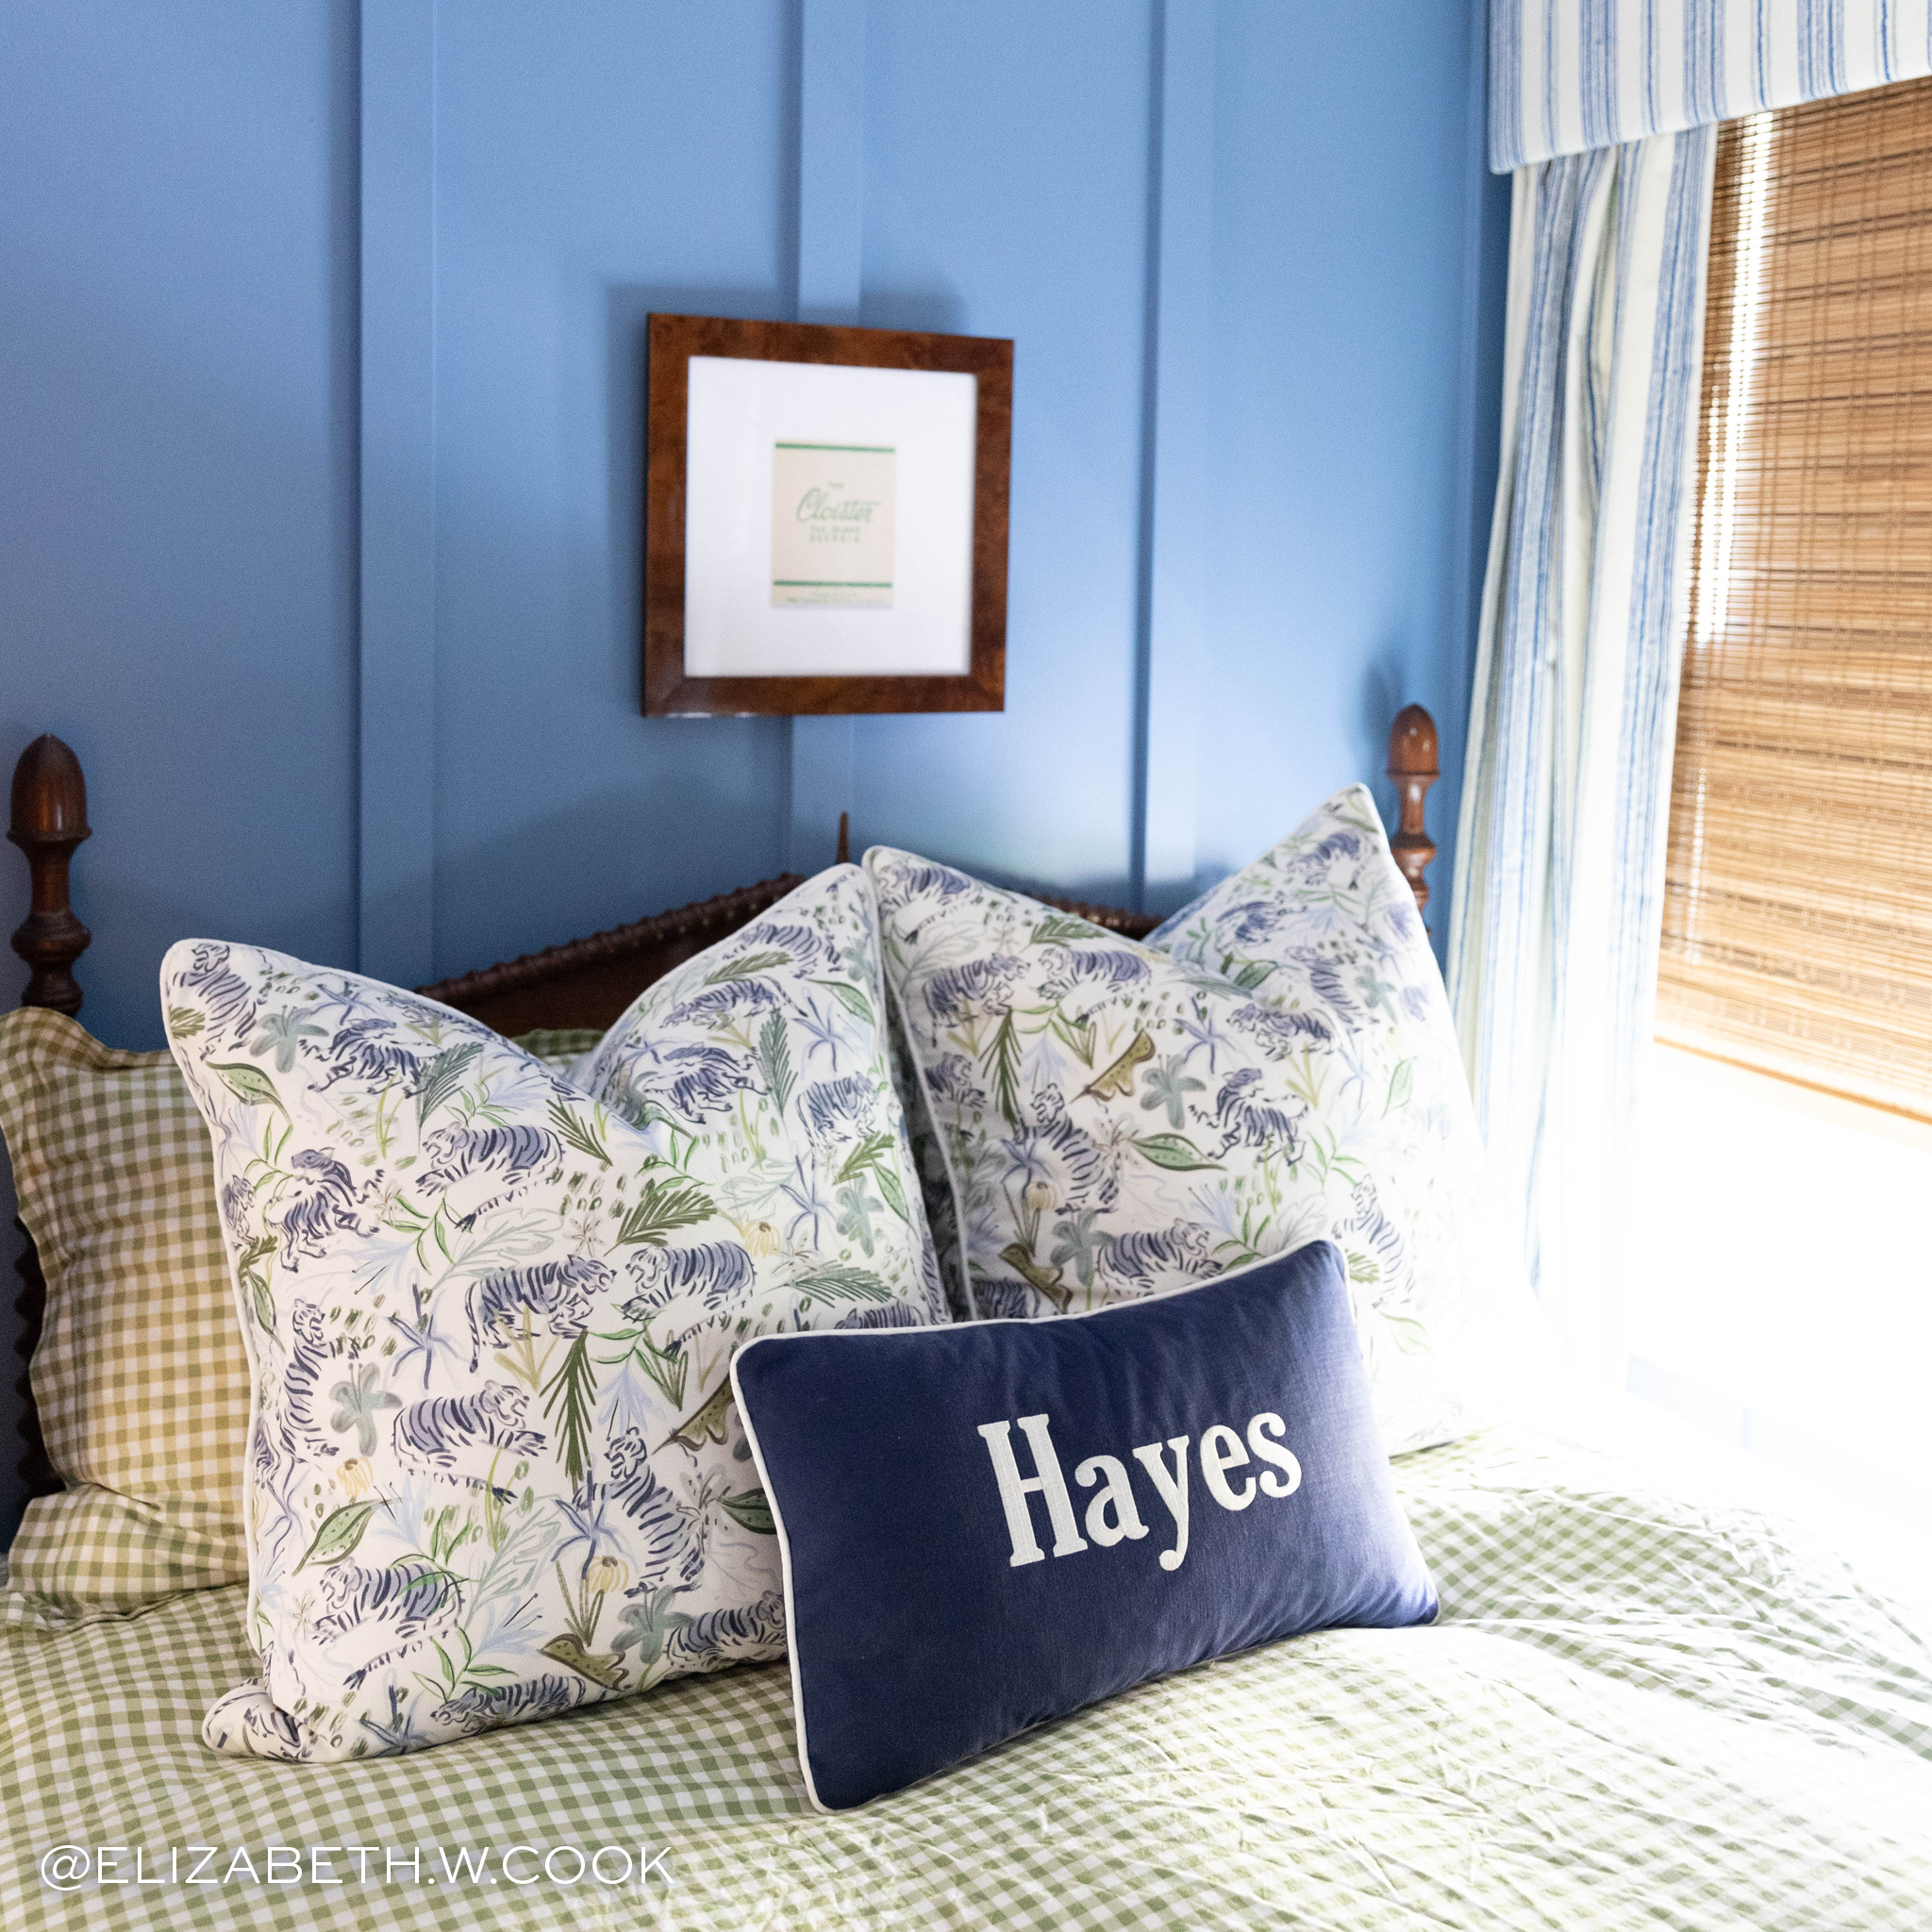 Bedroom styled with floral green and blue pillows and a navy blue pillow with sky blue piping and embroidery saying "Hayes" on a green checkered bed in front of window